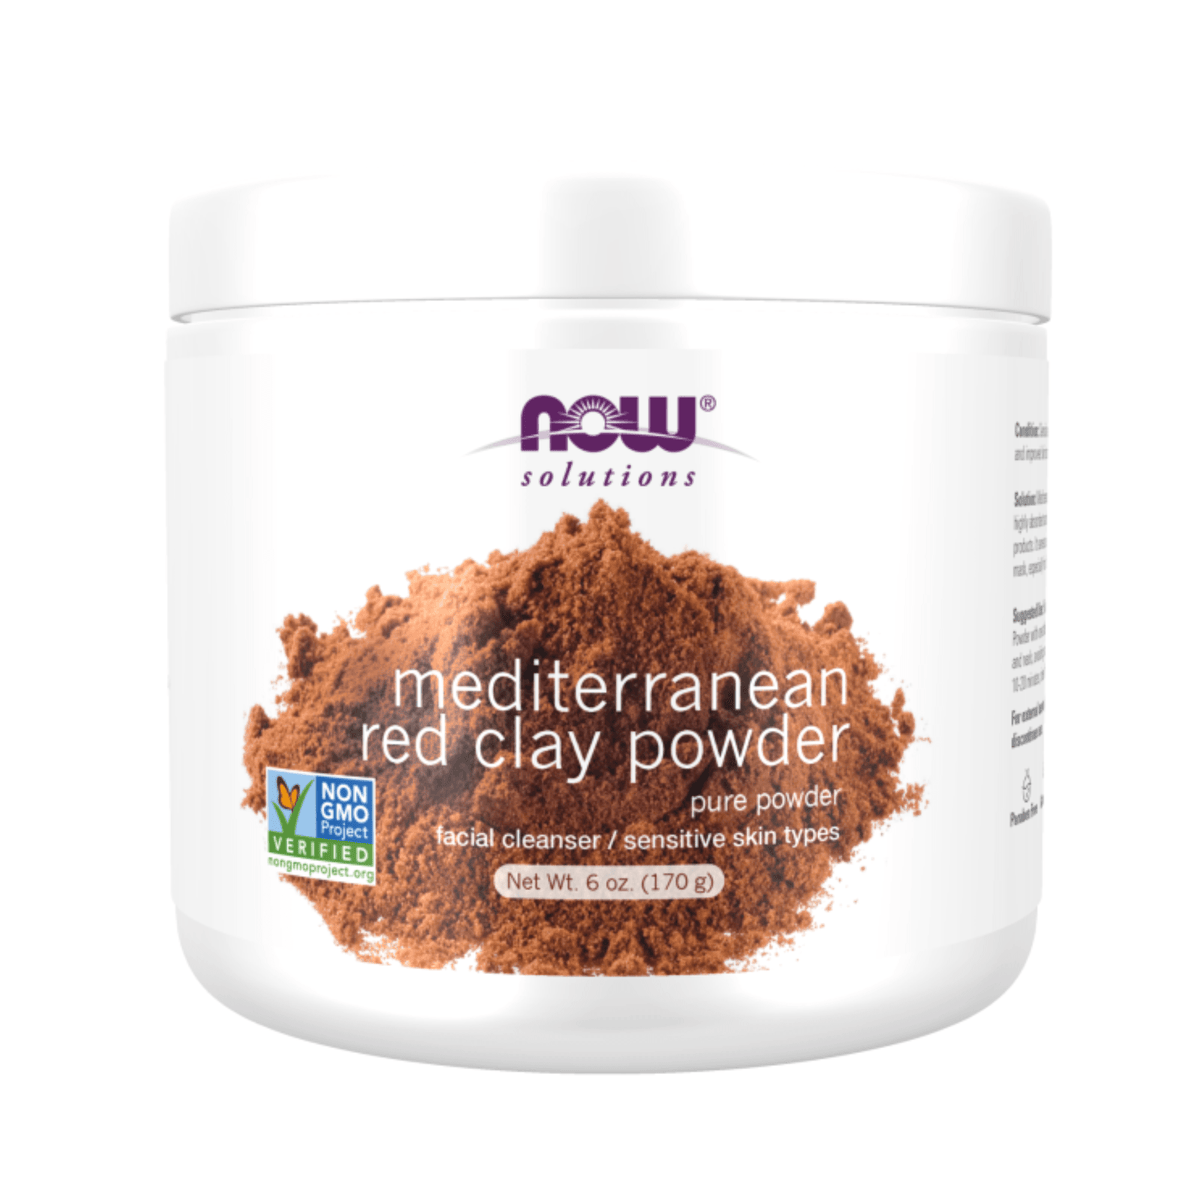 Primary Image of Mediterranean Red Clay Powder